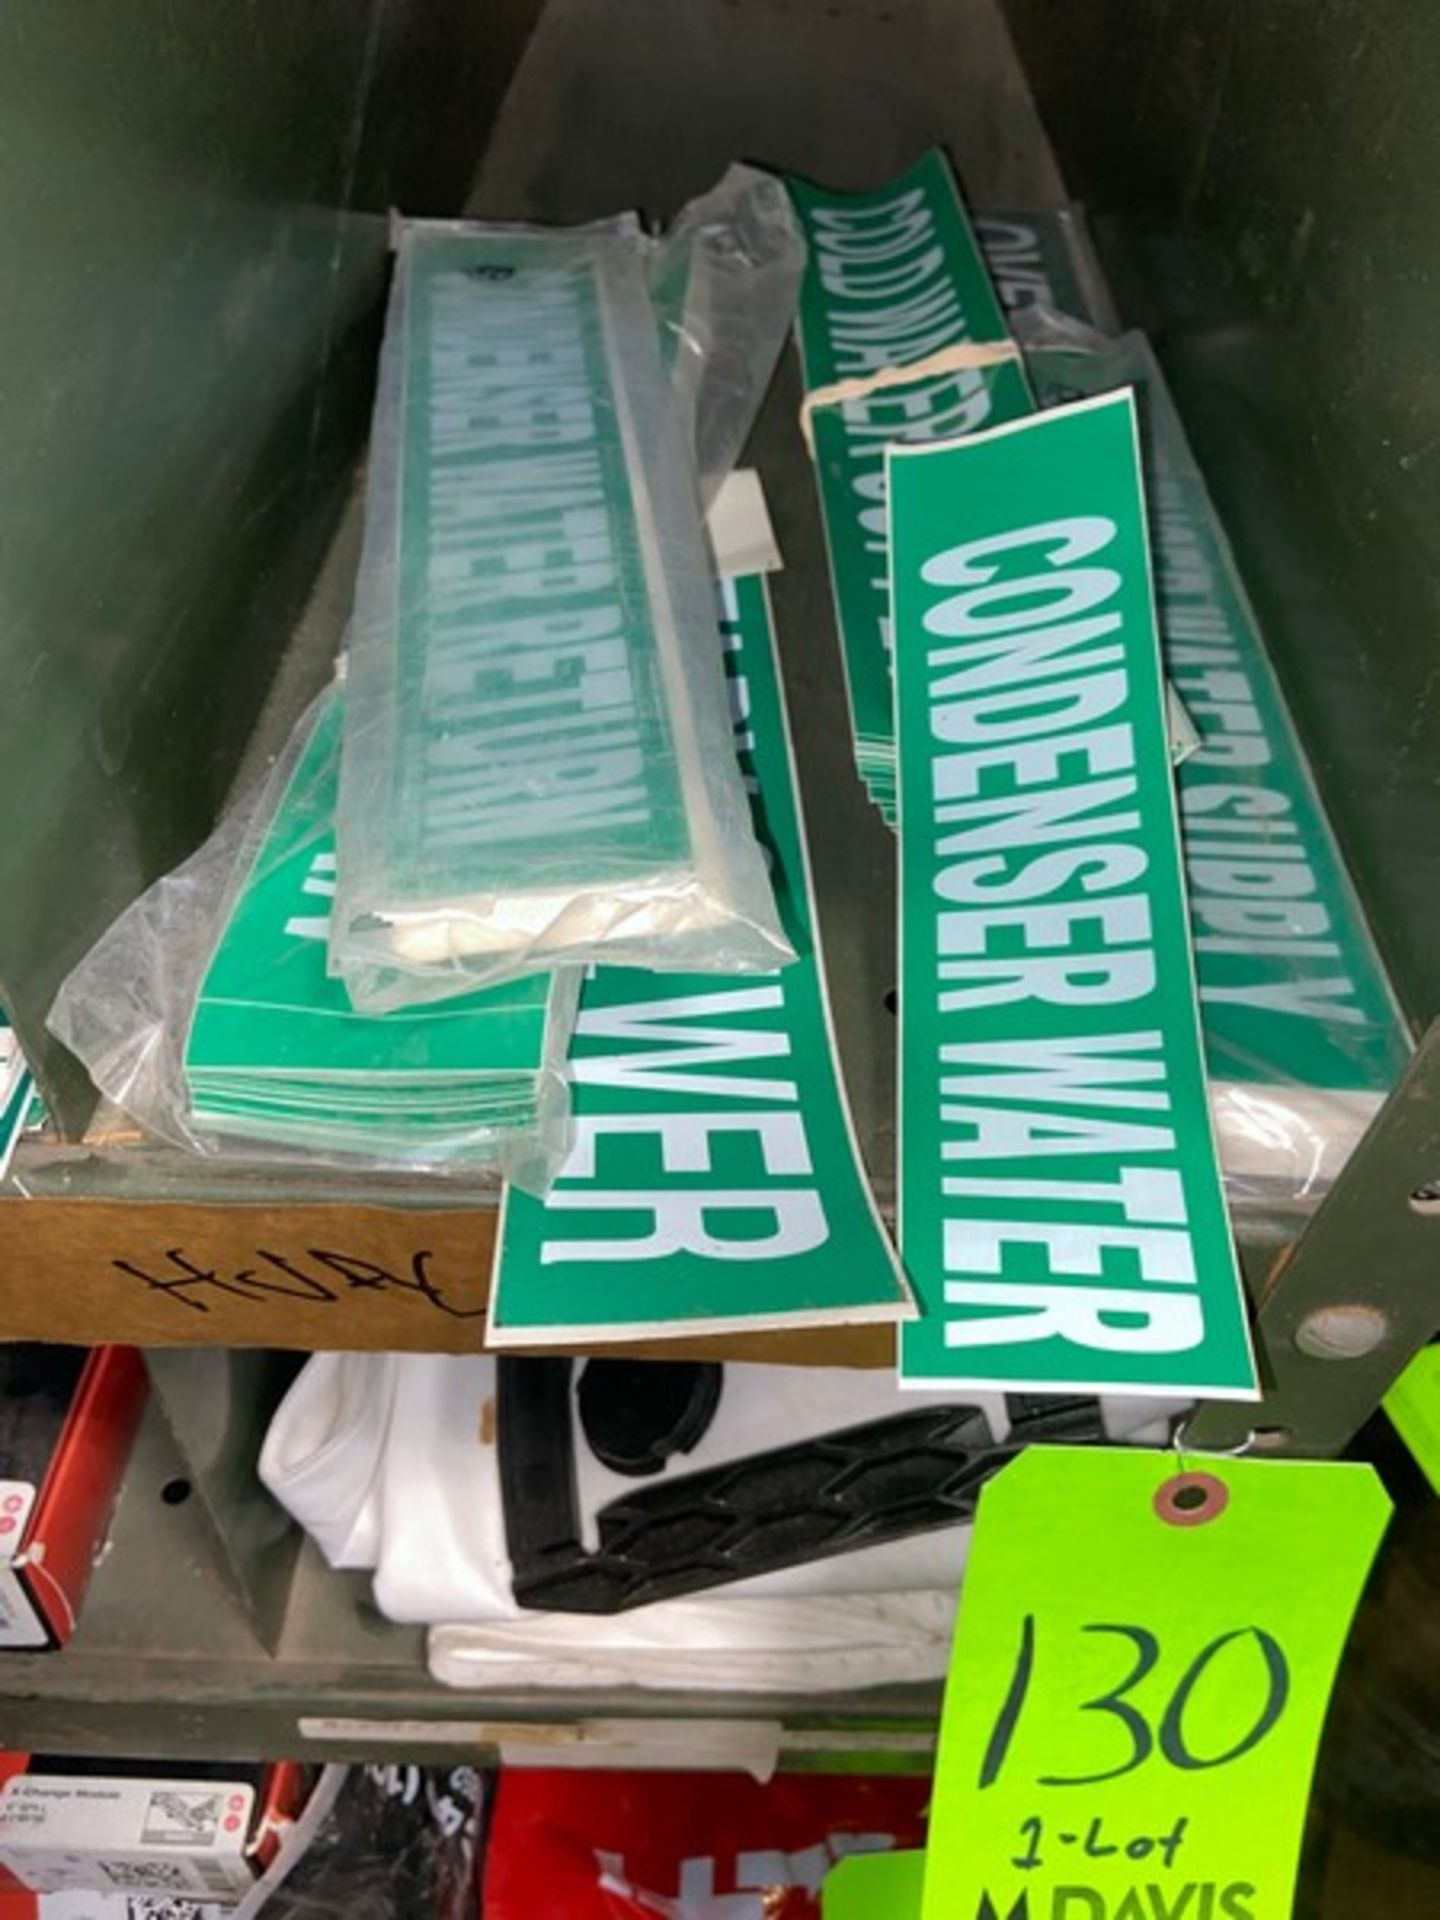 Lot of Assorted Pipe Signage, Includes Green & Yellow Signage, Labels Include Sanitary Drain, - Image 5 of 10